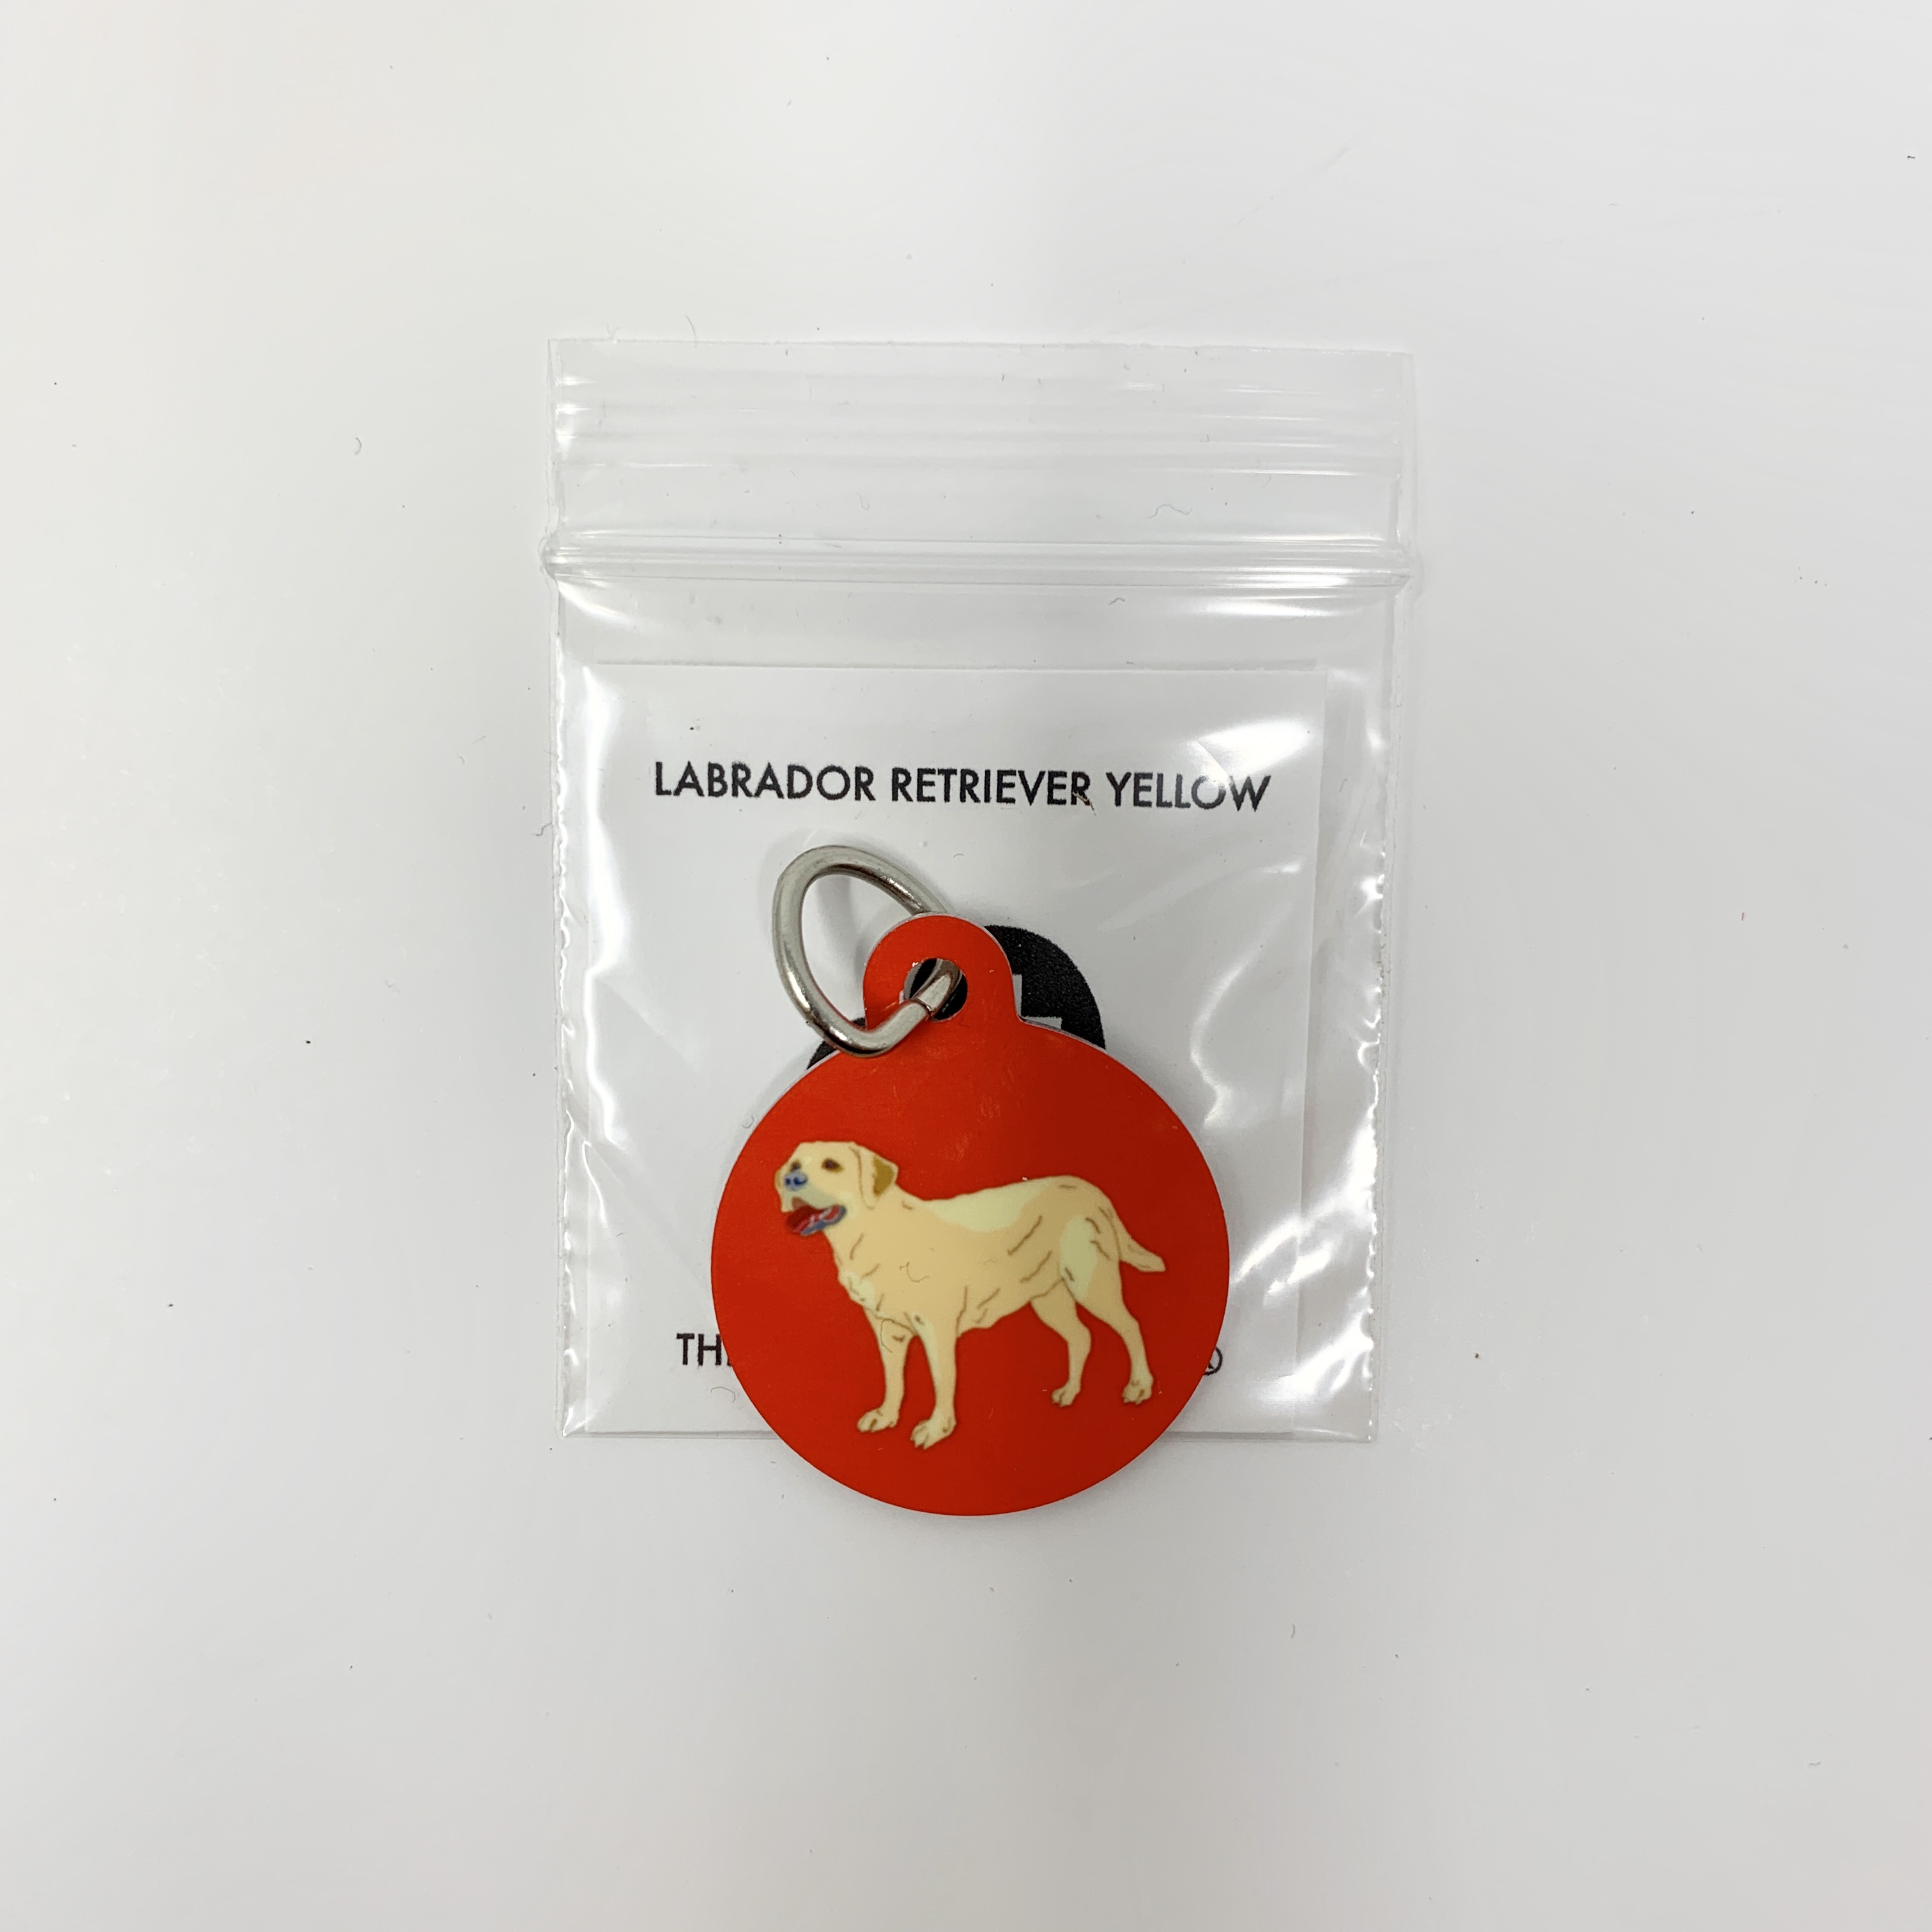 Charms featuring  illustrations of over 100 
 dog breeds. Can be used as pet jewelry, key chai